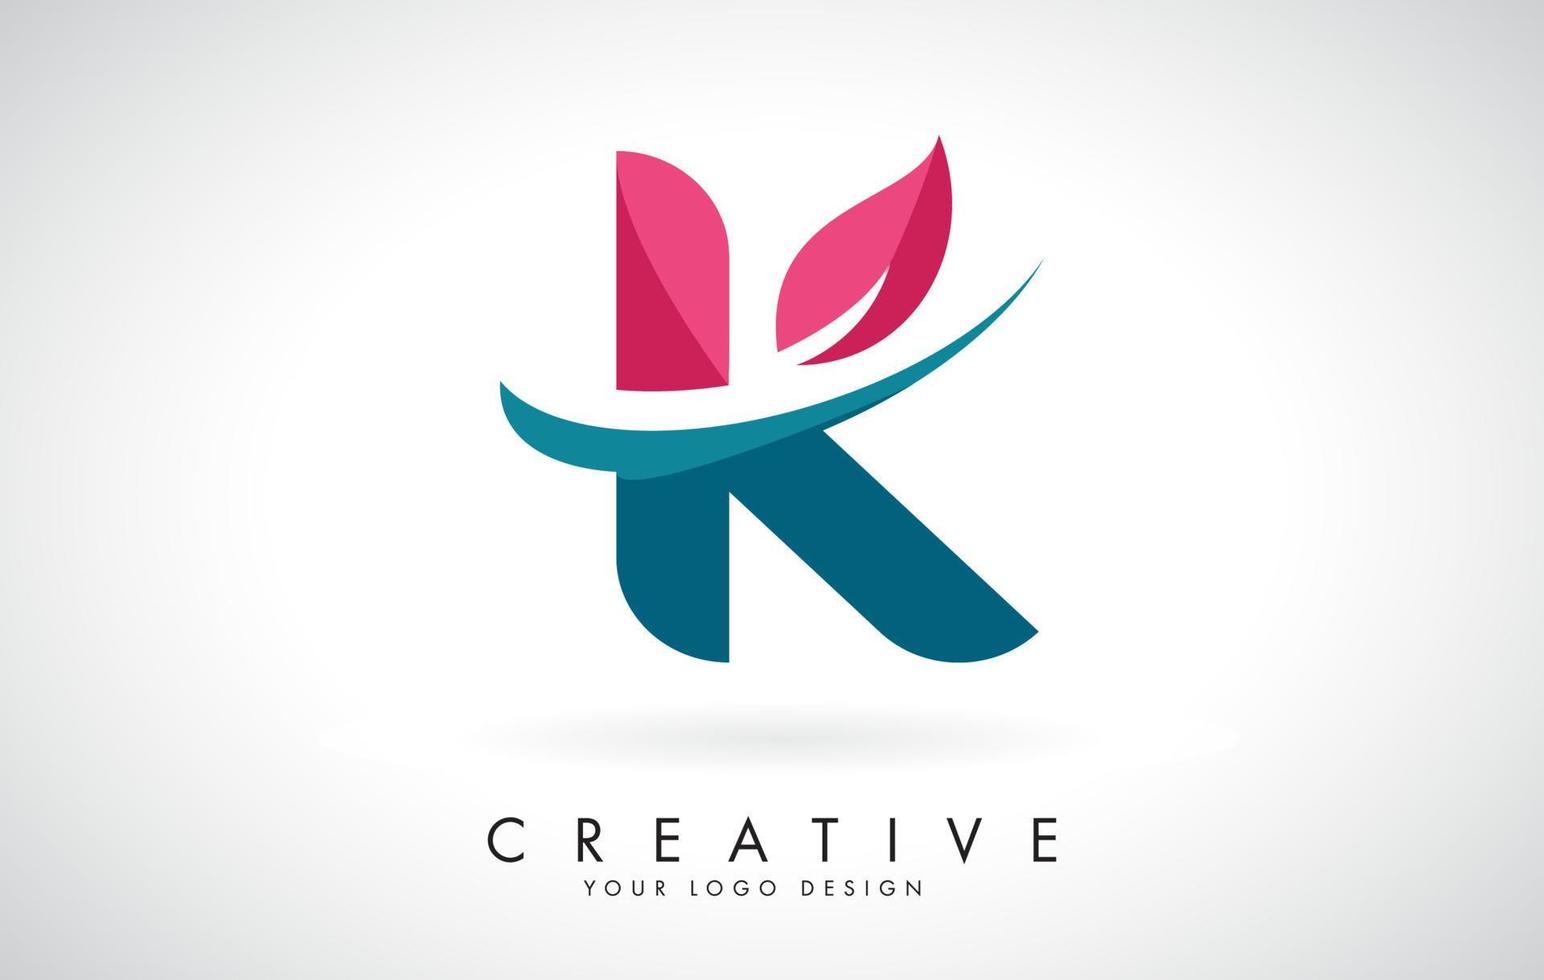 Blue and Red Letter K with Leaf and Creative Swoosh Logo Design. vector